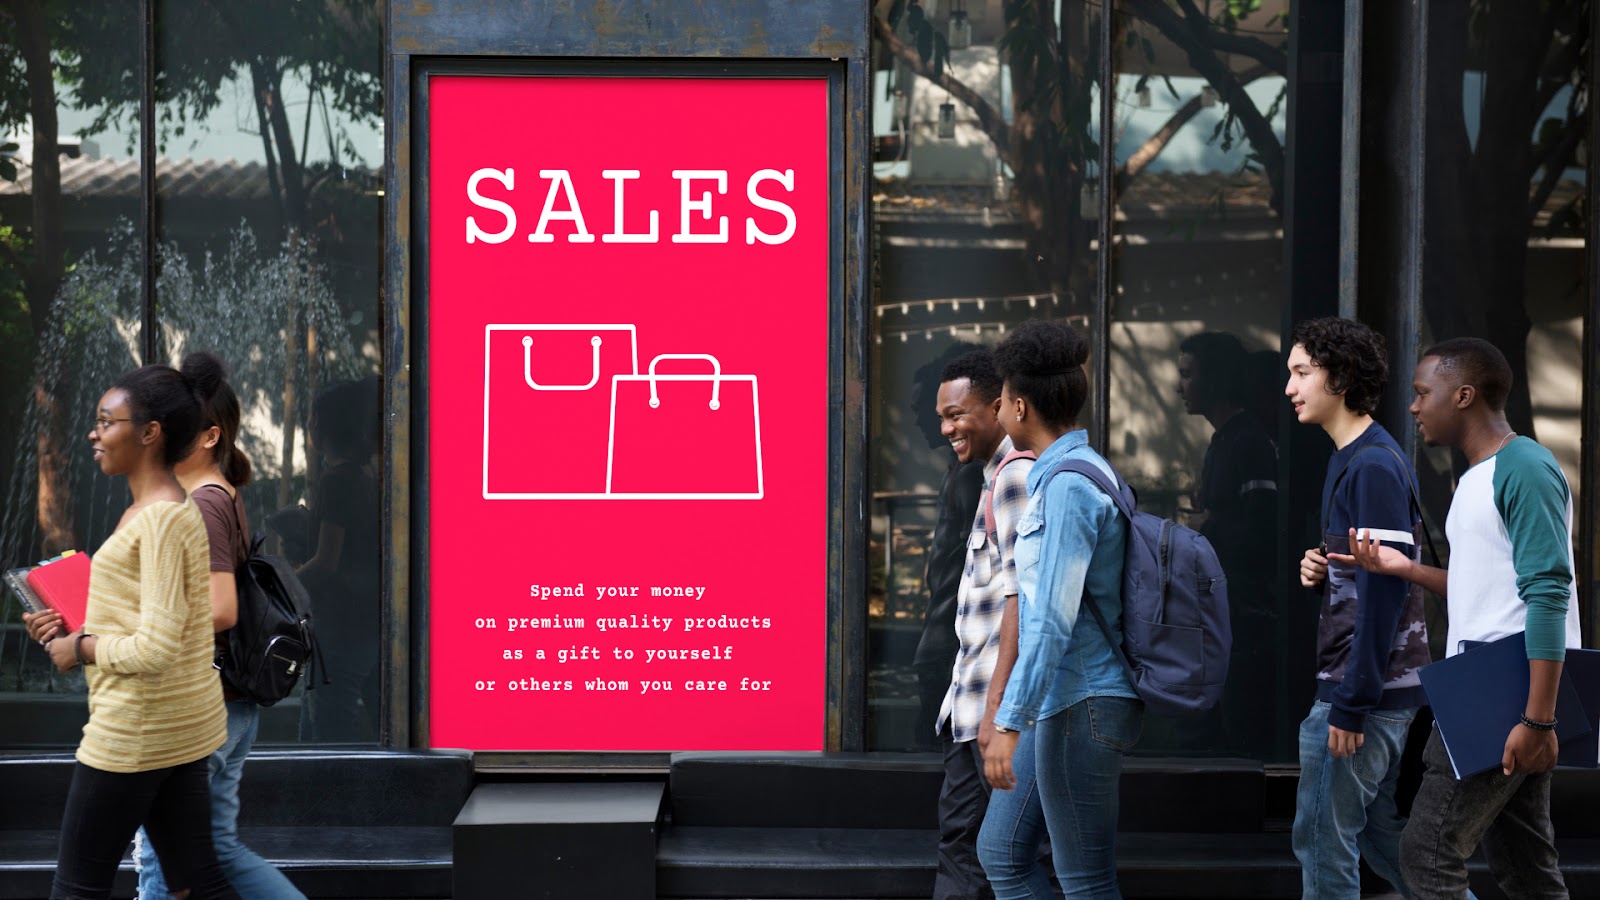 Best Sales and Deals You Can Get Every Month - Shopping Calendar